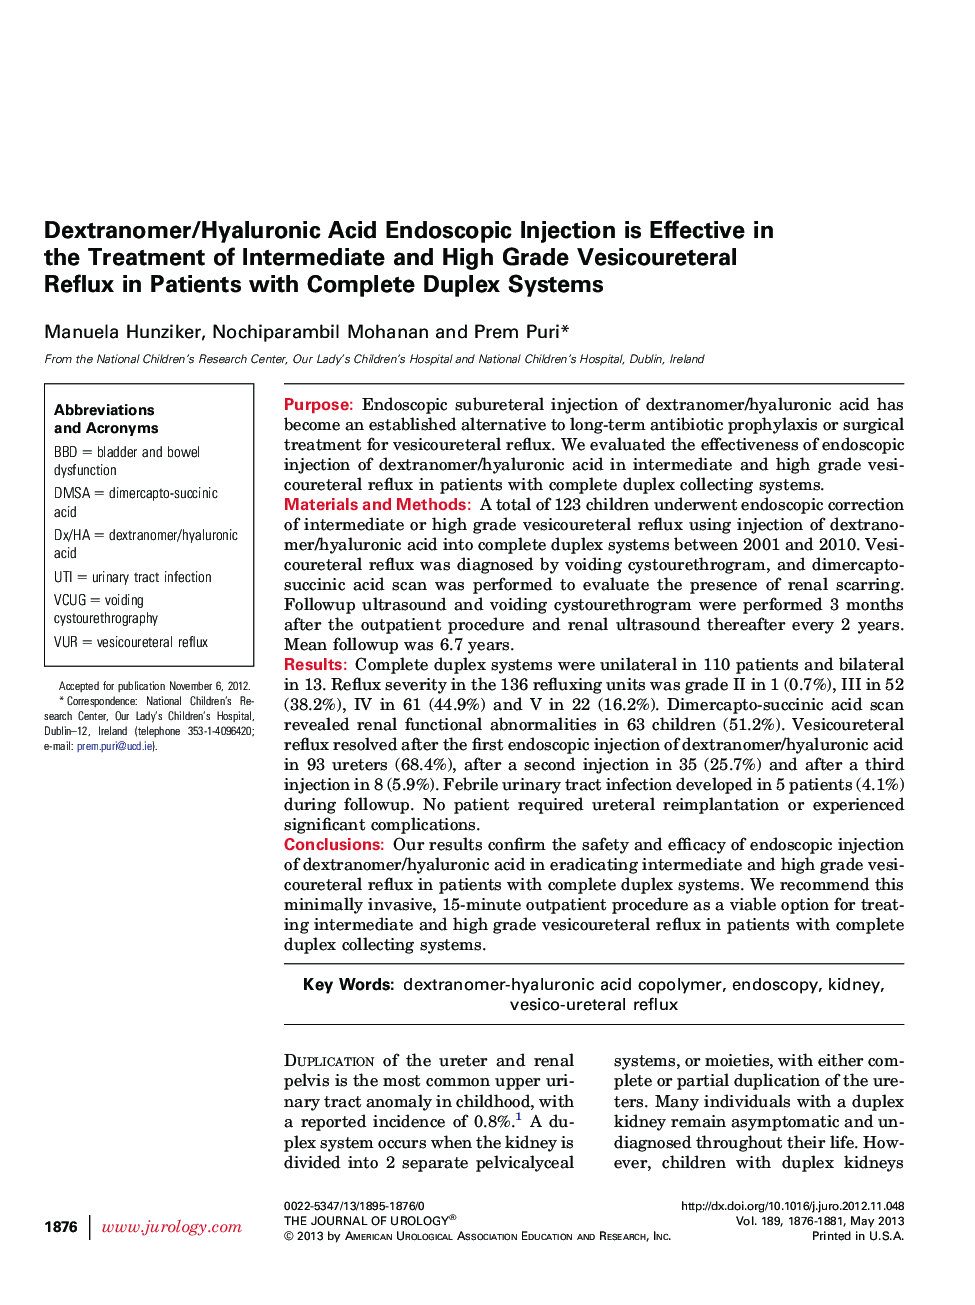 Dextranomer/Hyaluronic Acid Endoscopic Injection is Effective in the Treatment of Intermediate and High Grade Vesicoureteral Reflux in Patients with Complete Duplex Systems